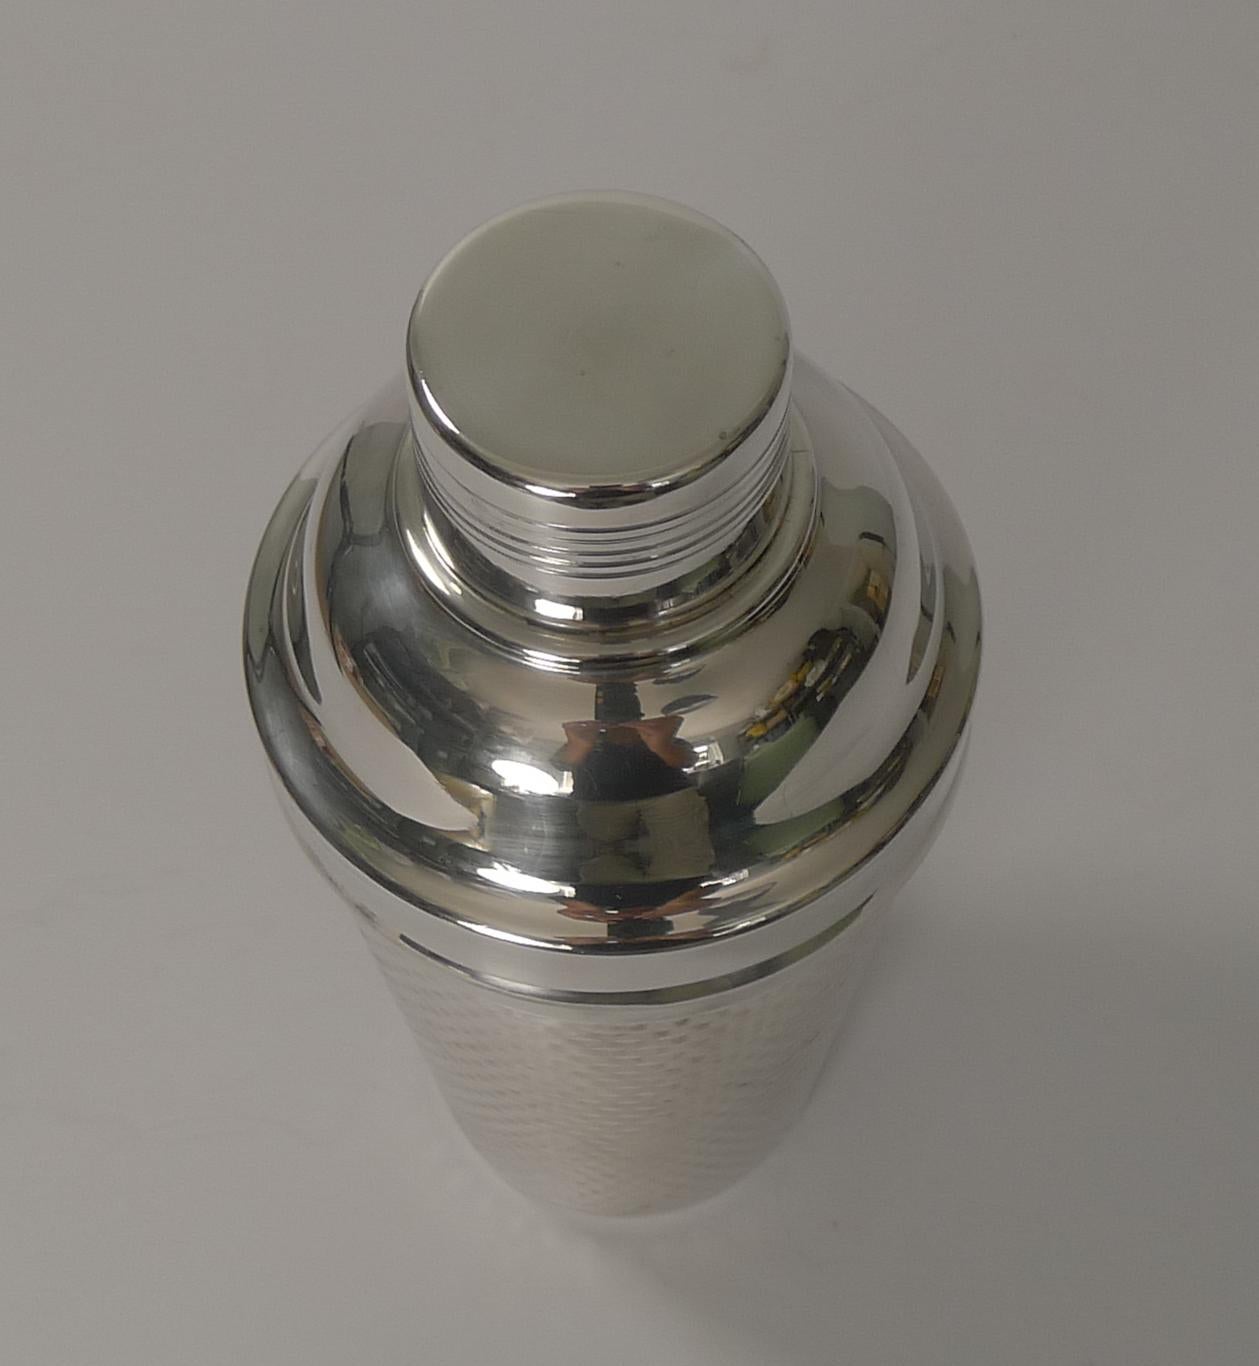 Mid-20th Century English Art Deco Silver Plated Cocktail Shaker, circa 1930